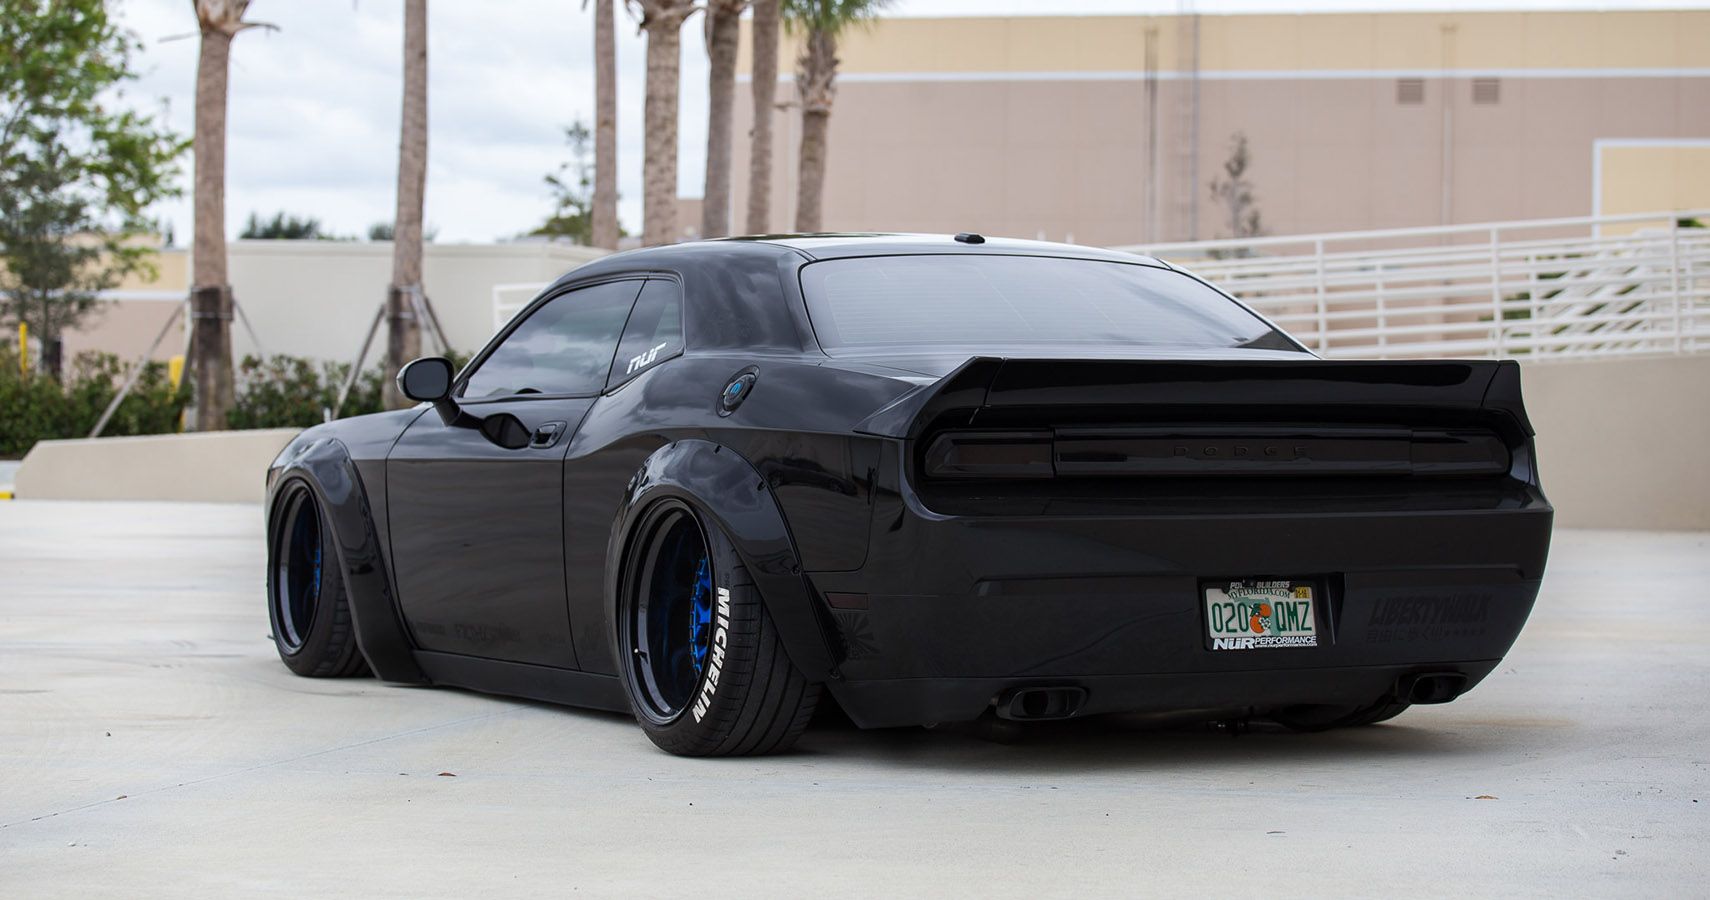 The Black As Night Dodge Challenger